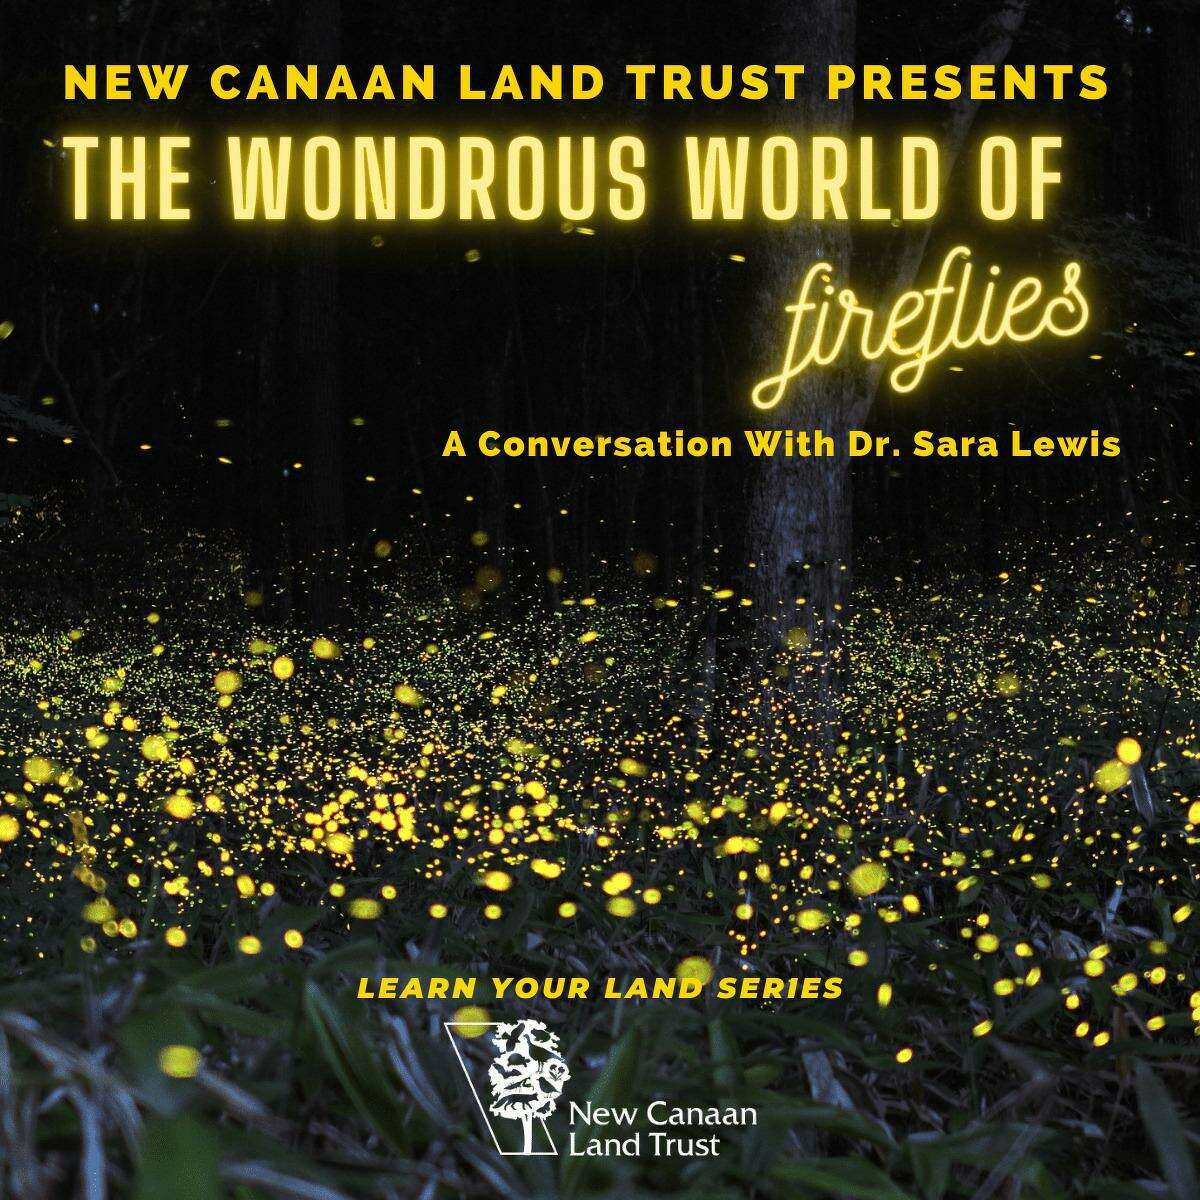 The New Canaan Land Trust has published its first podcast, which is with Dr. Sara Lewis, who is also a scientist, and biology professor.